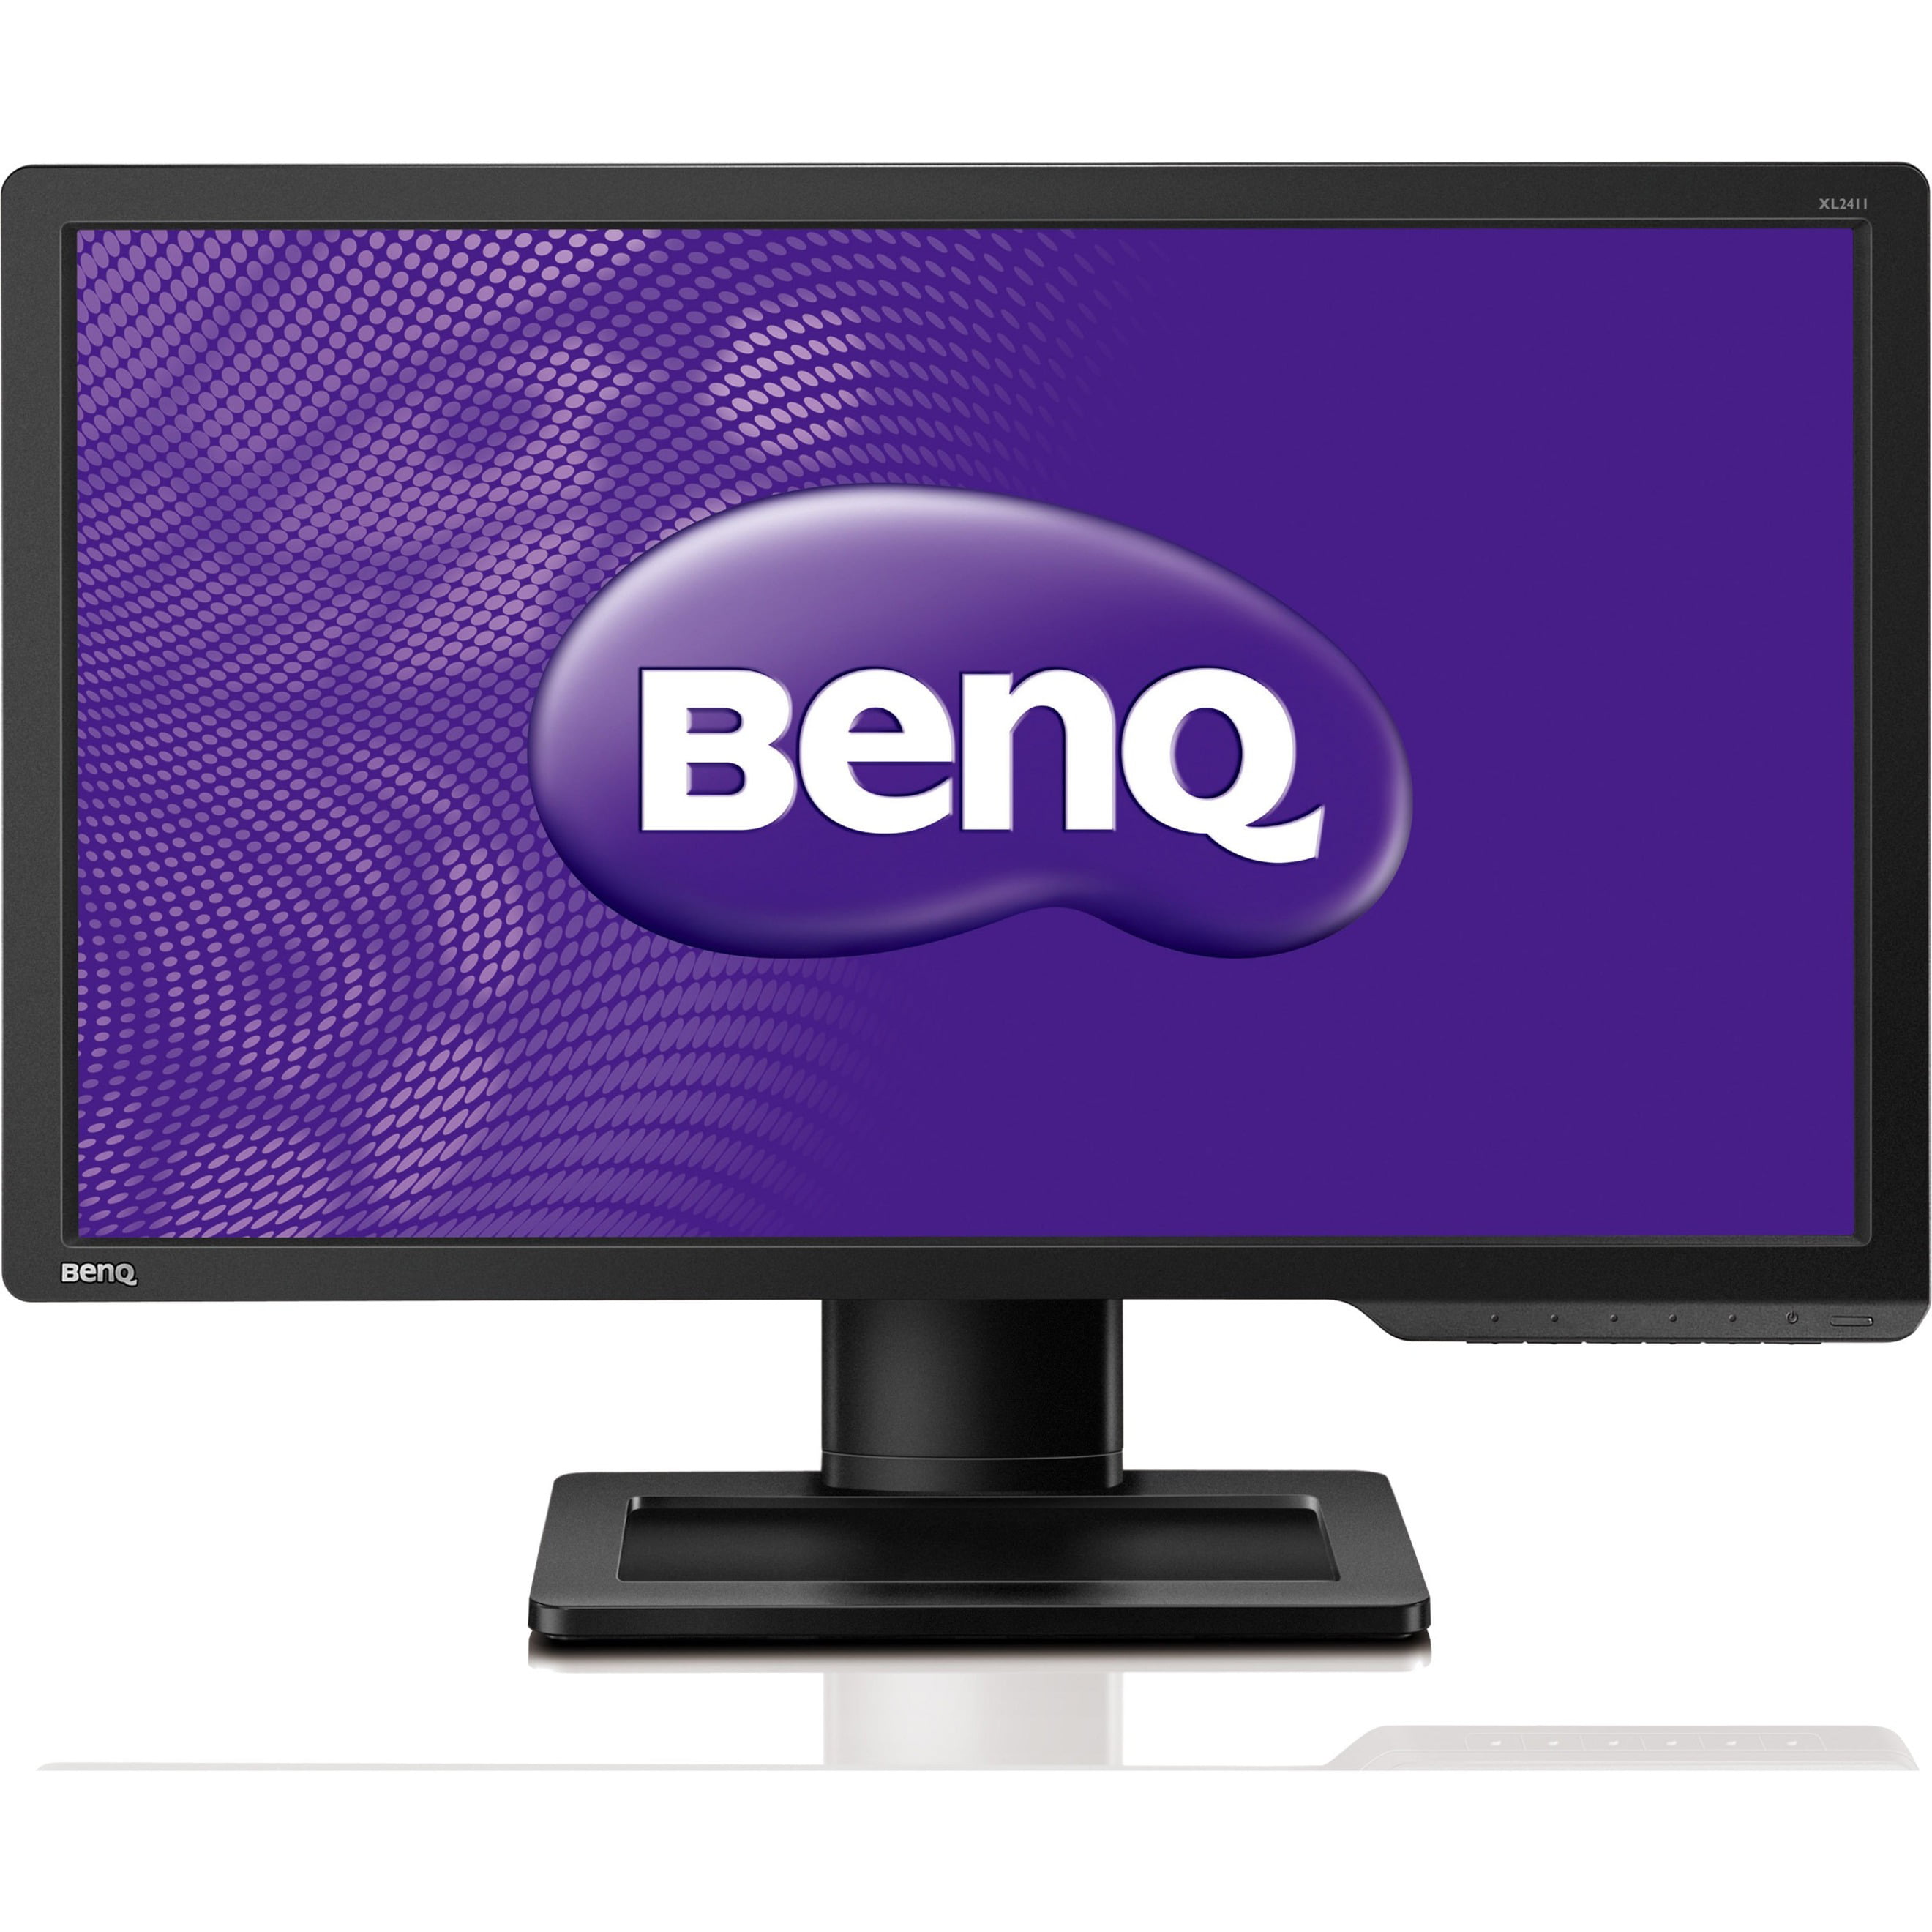 5 Fun Online Games to Play On Your Classroom BenQ Display